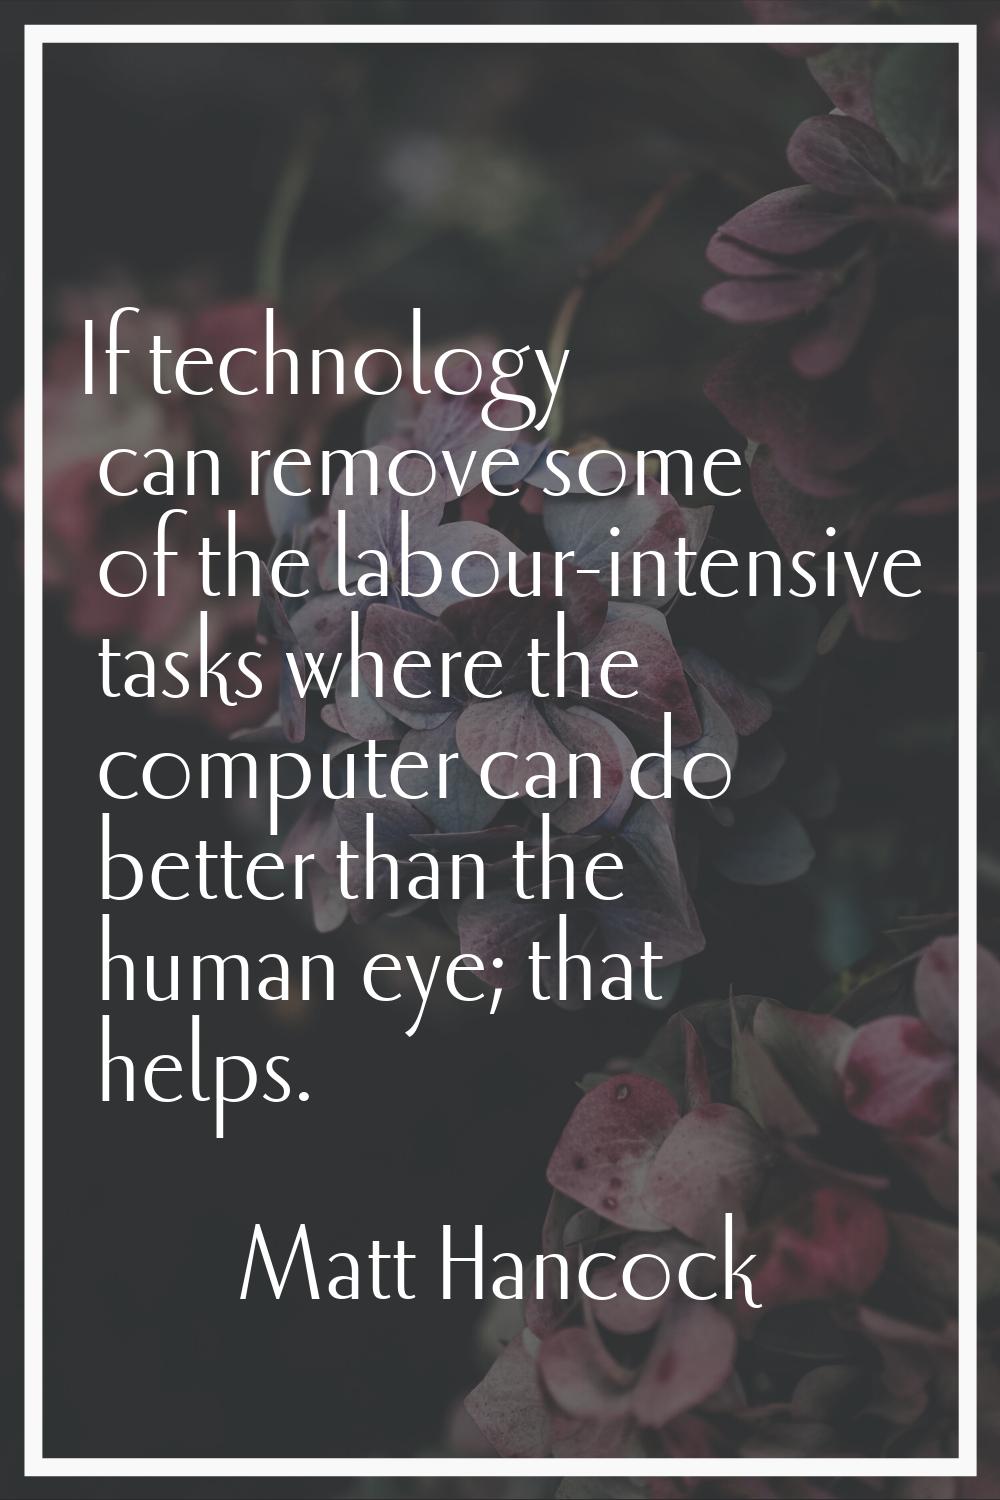 If technology can remove some of the labour-intensive tasks where the computer can do better than t